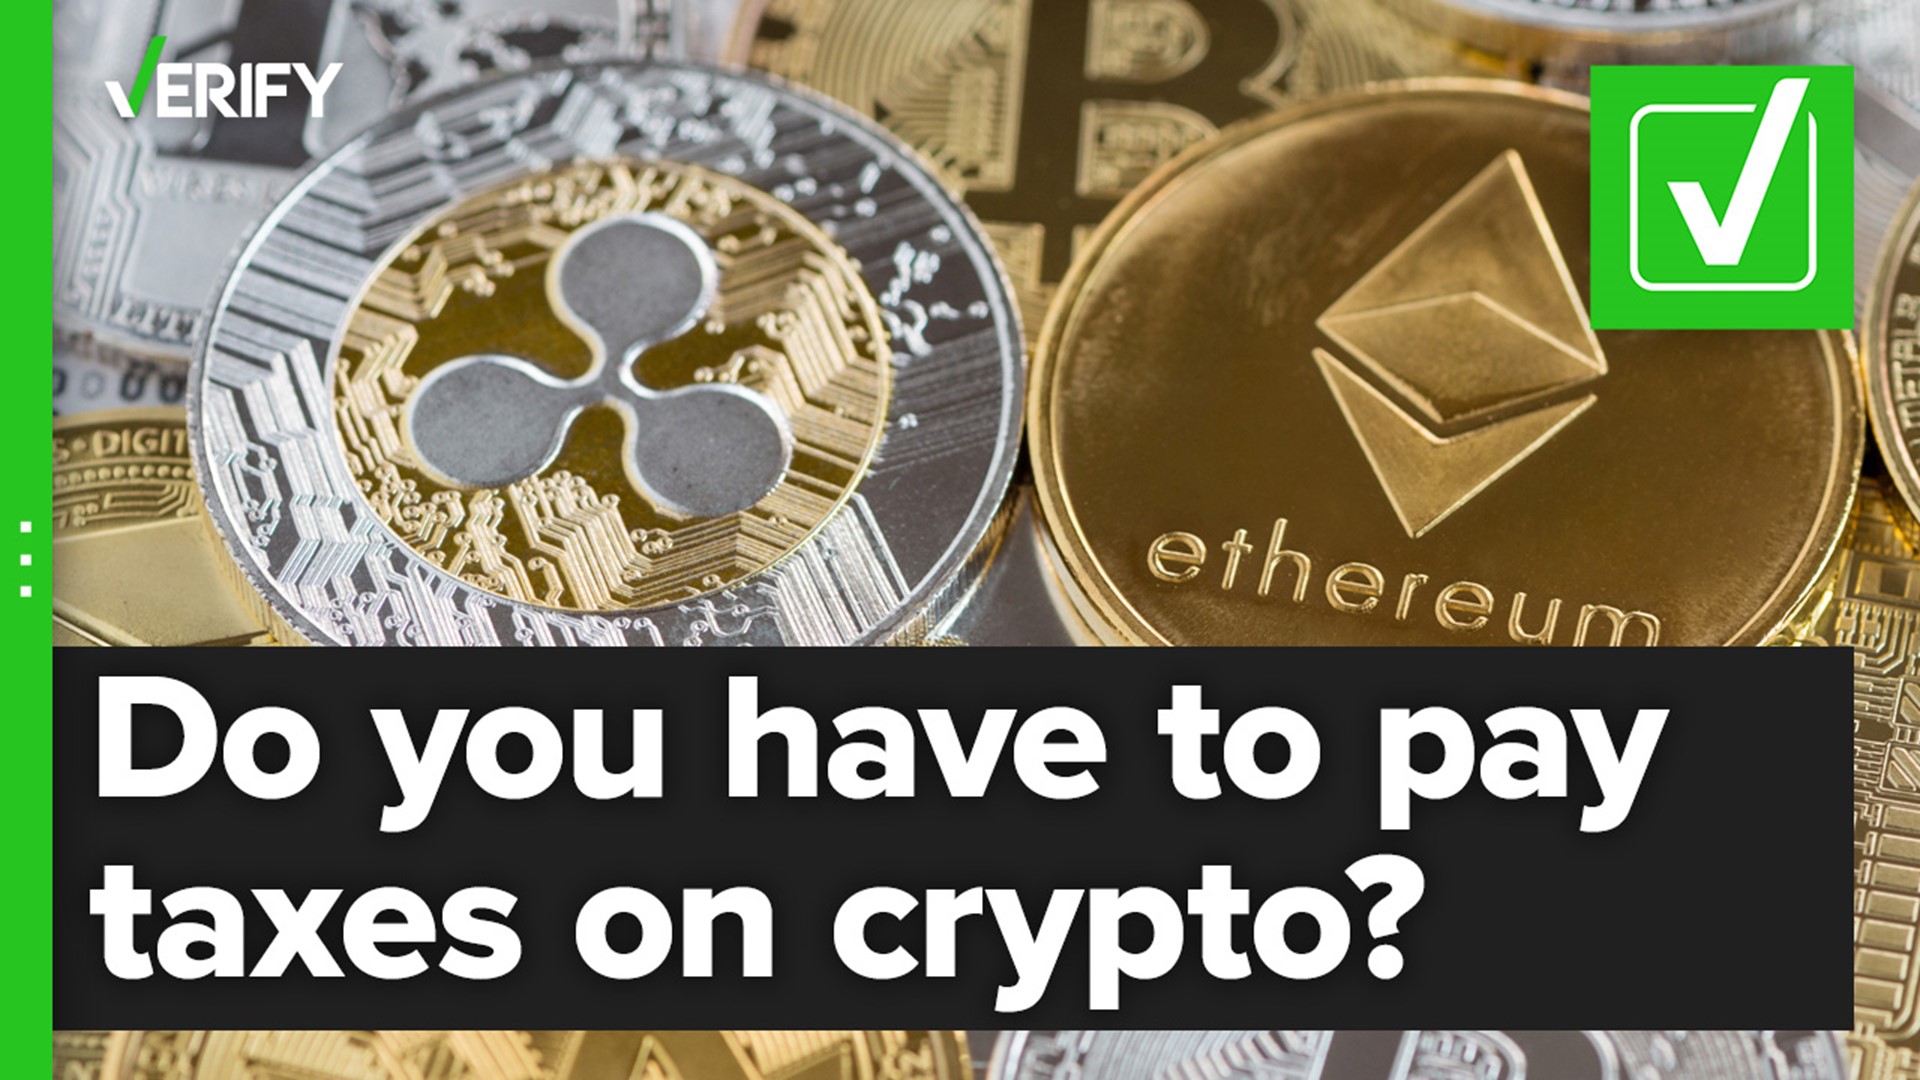 If you sell or exchange cryptocurrency, you’ll have to pay capital gains taxes. If you receive crypto as payment or if you mine it, it’s taxable income.